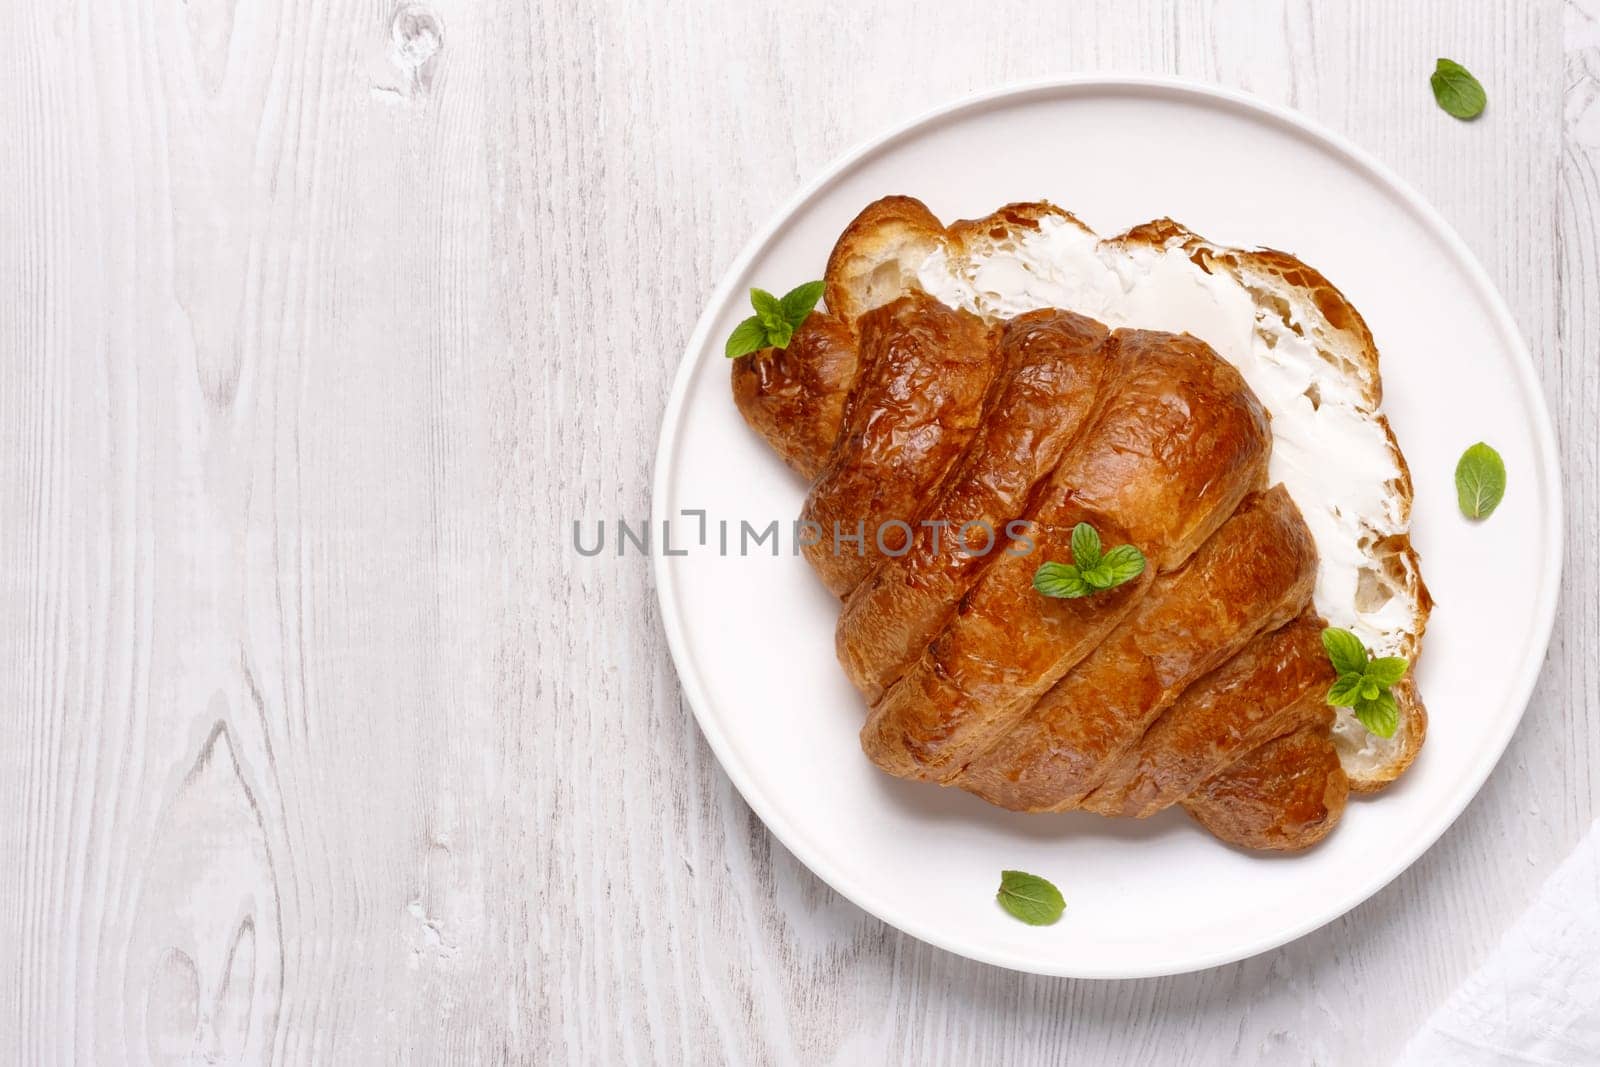 Sandwich with croissant and cream cheese, decorated with mint. Healthy eating concept.